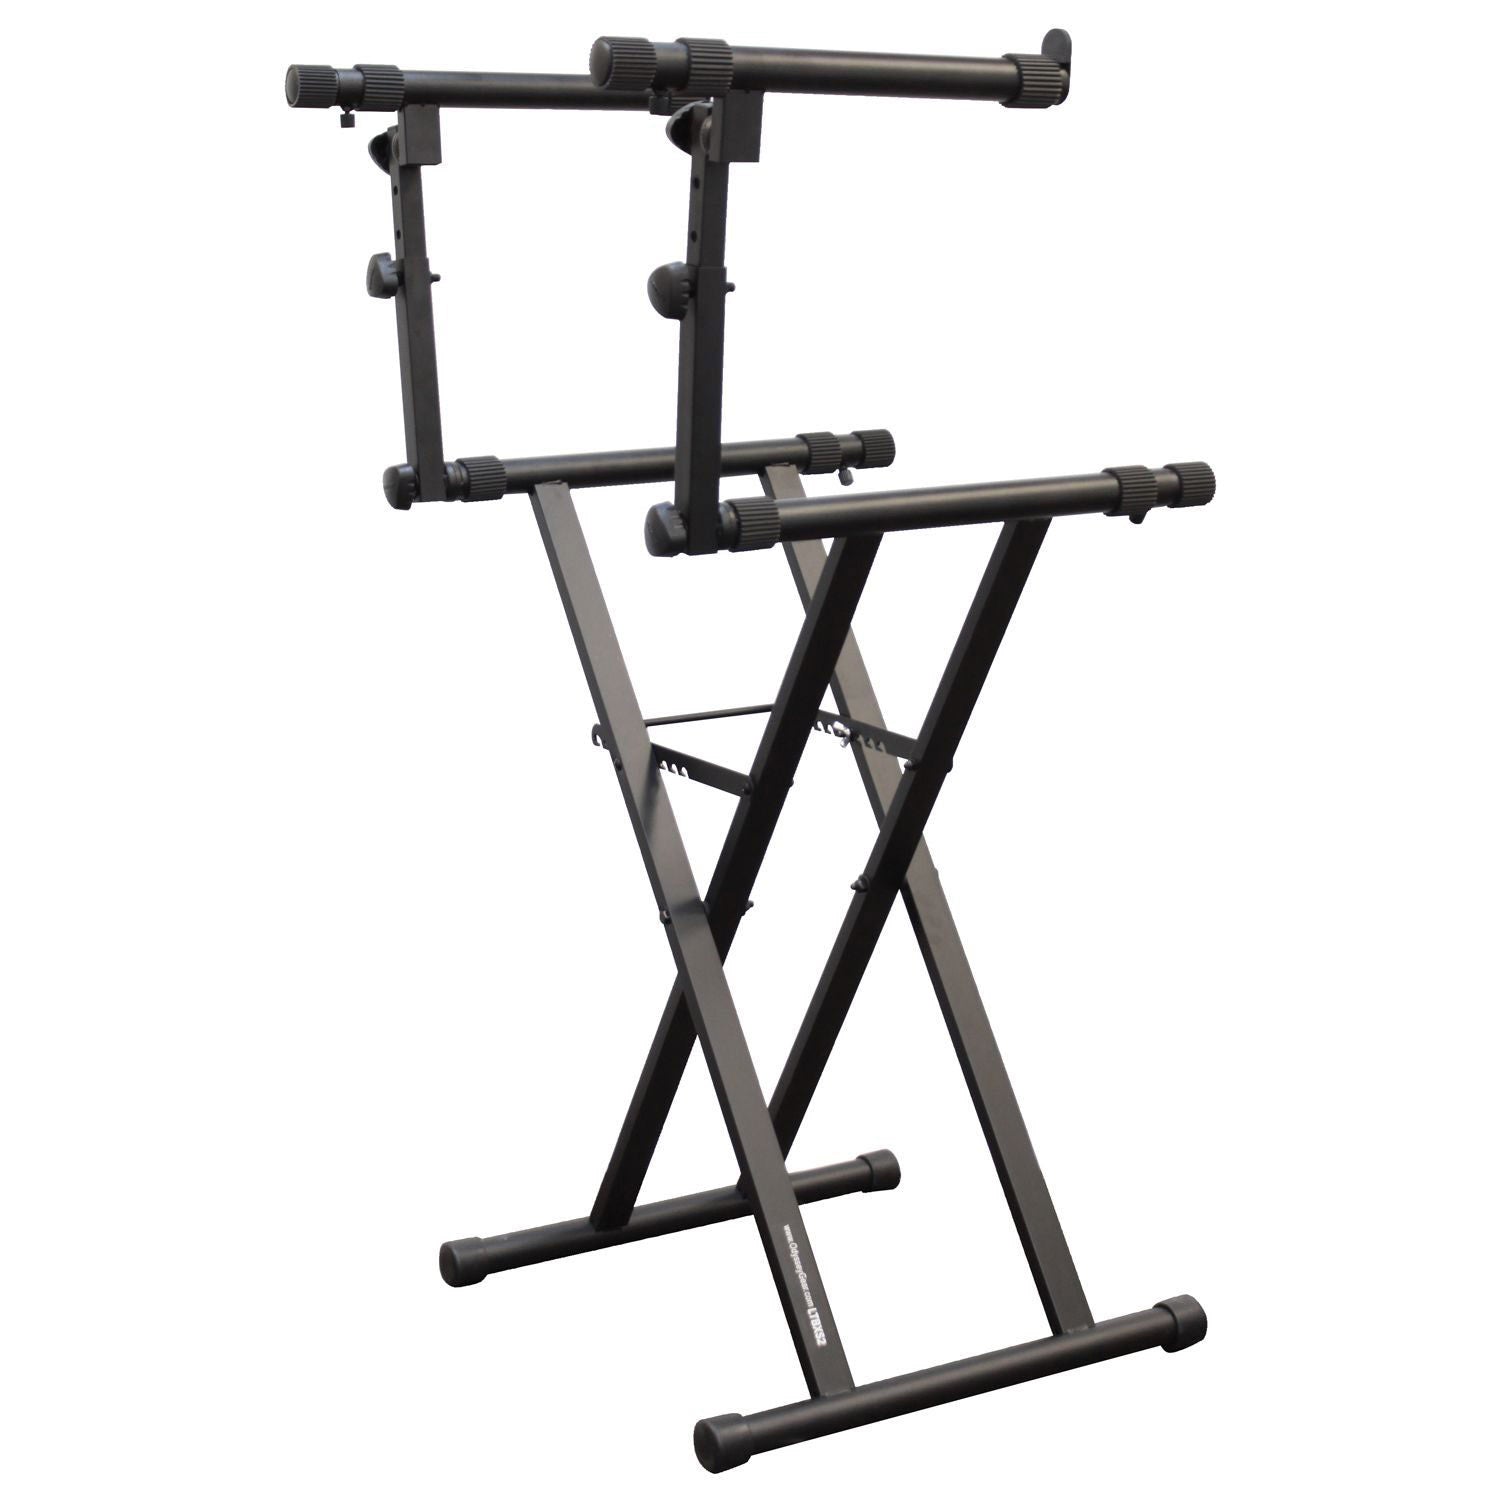 B-Stock: Odyssey LTBXS2, Two Tier X-Stand For DJ Coffins and Controller Cases - Black - Hollywood DJ